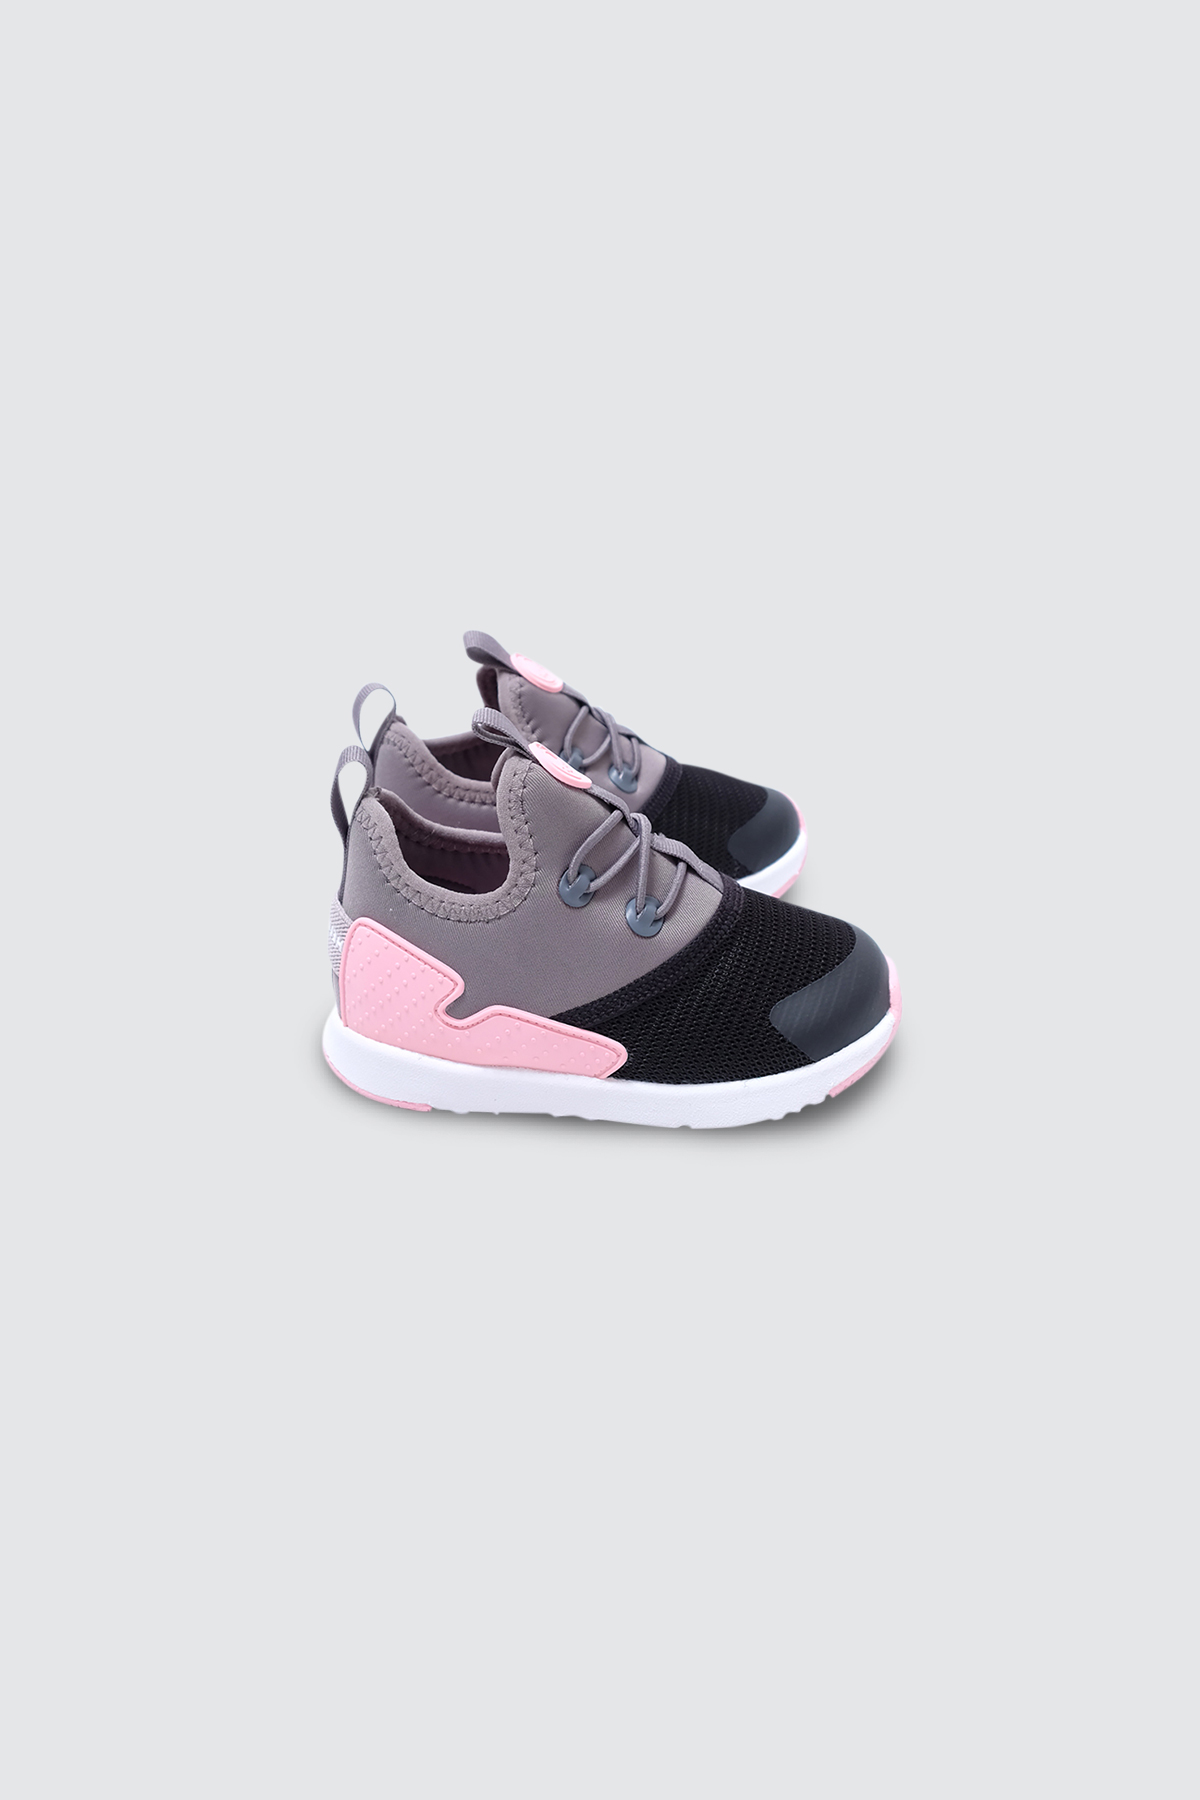 hype toddler shoes